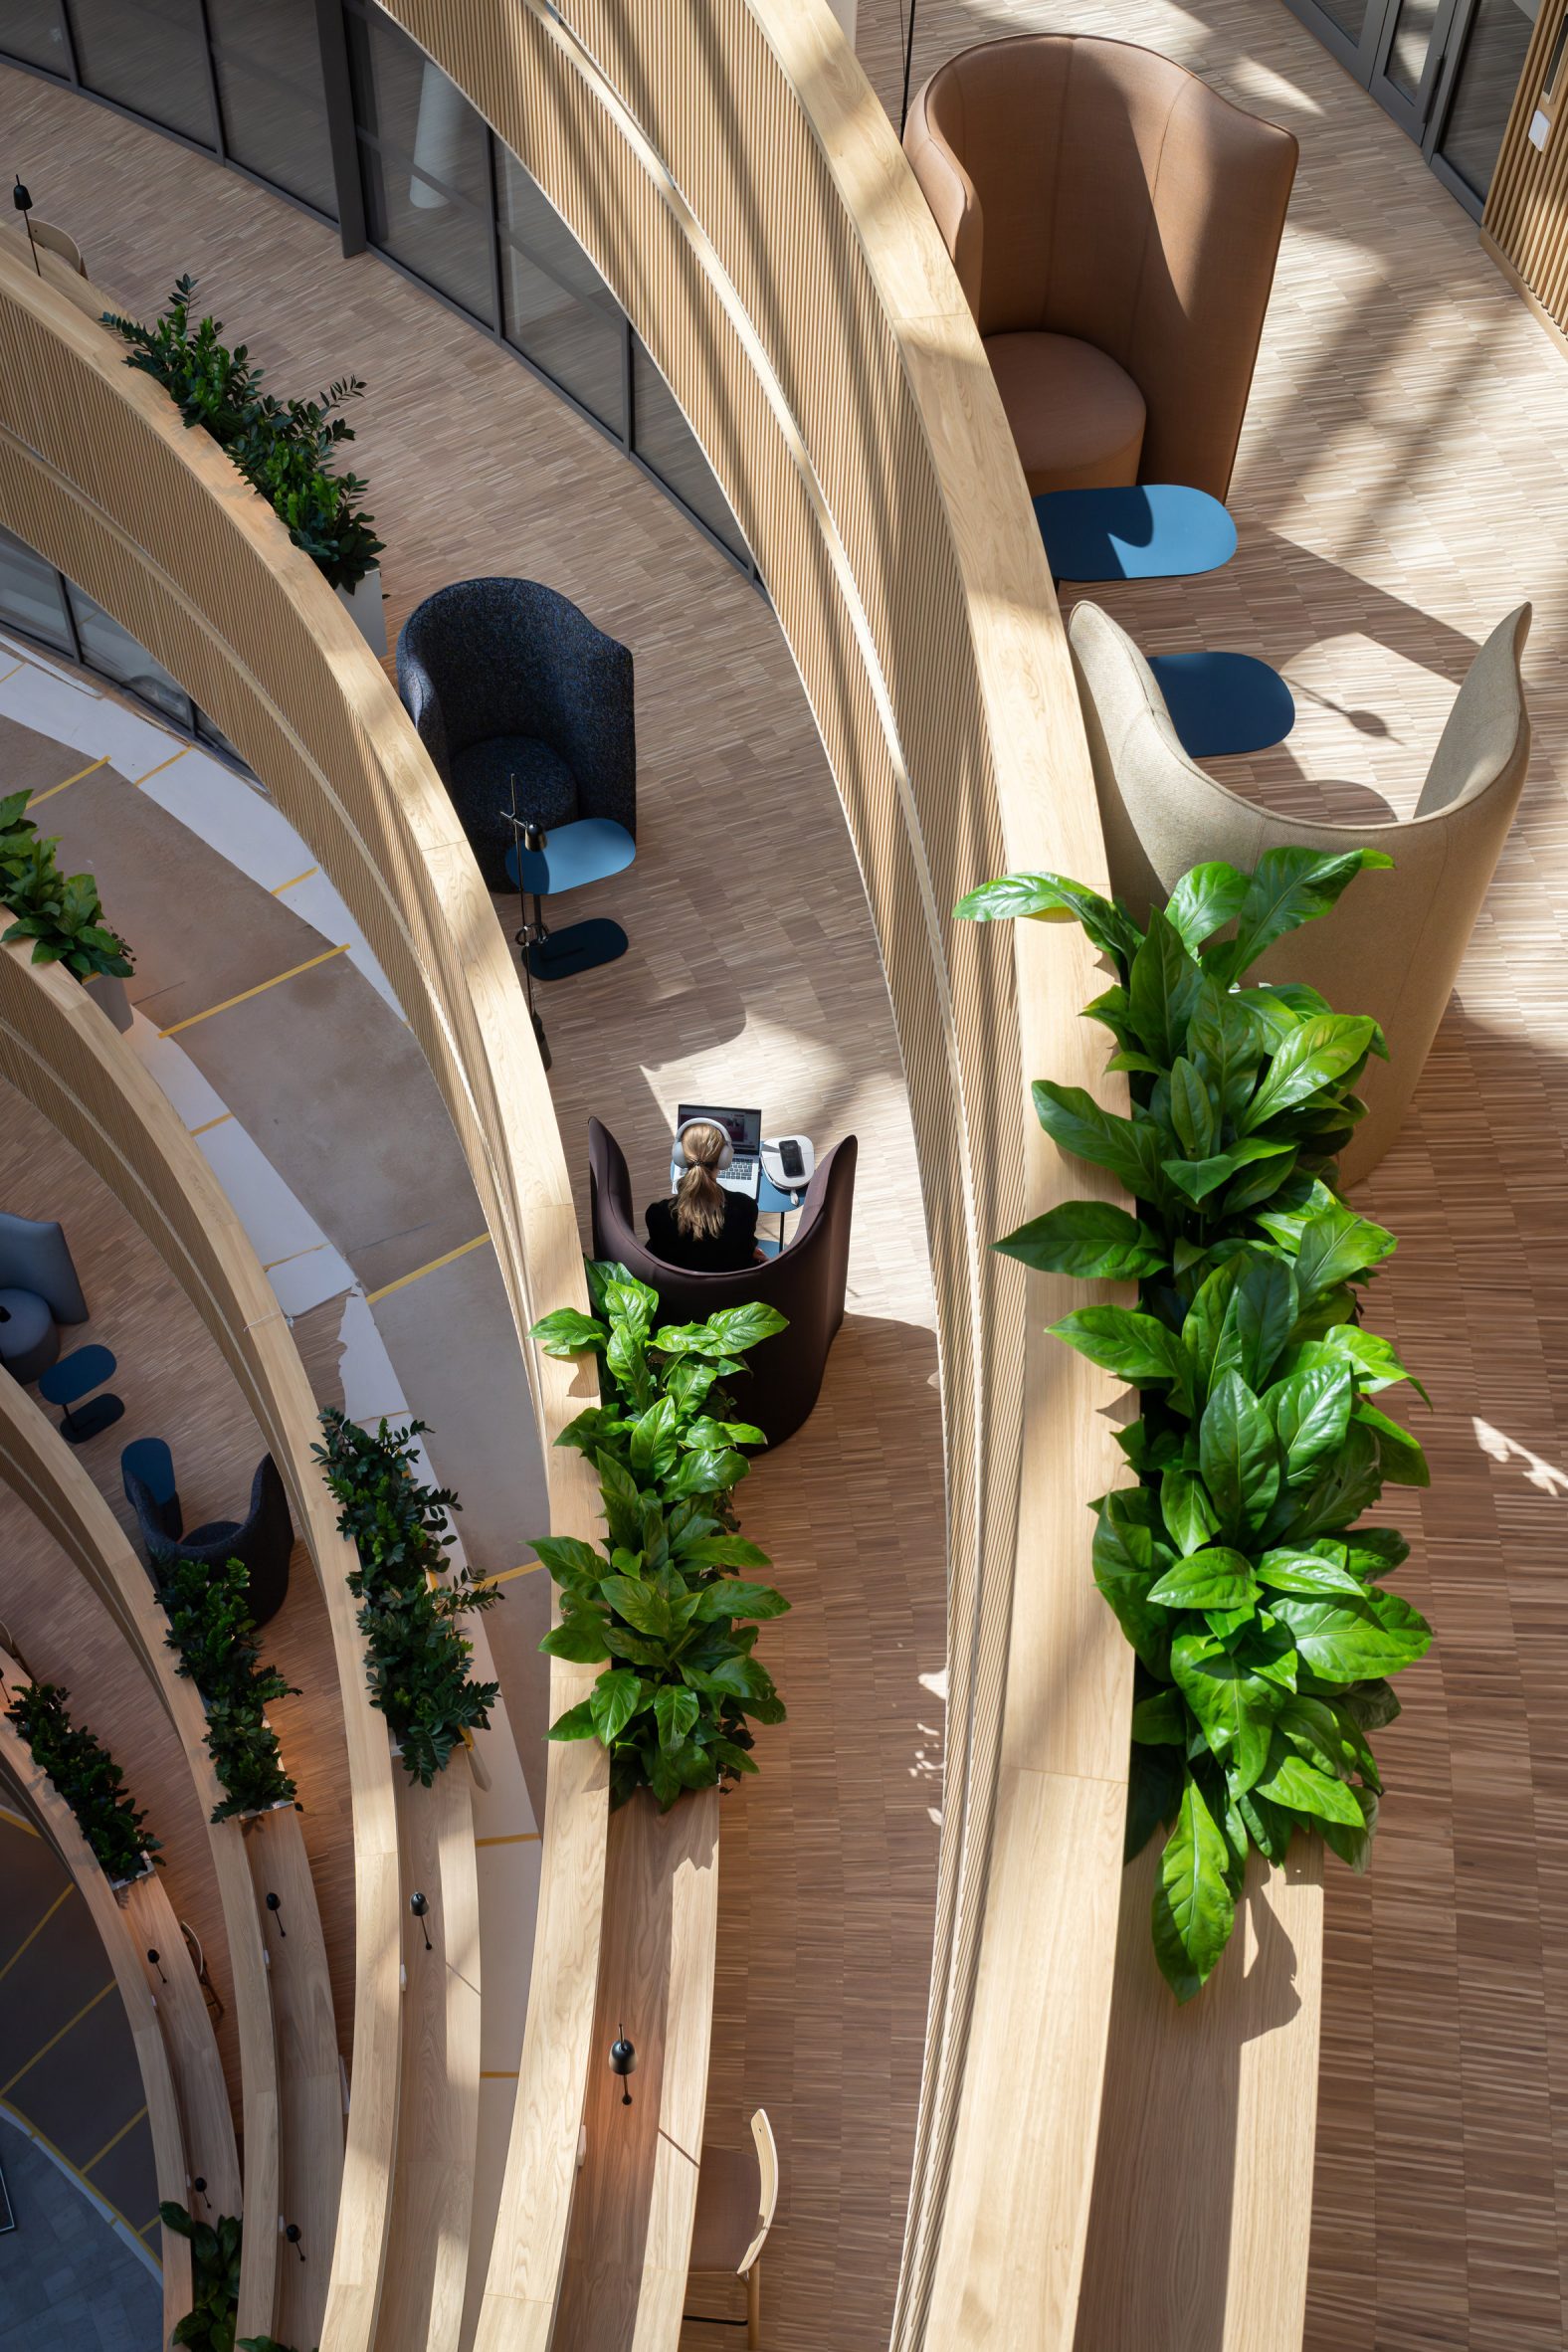 Seating spaces within the atrium at hub by 3XN